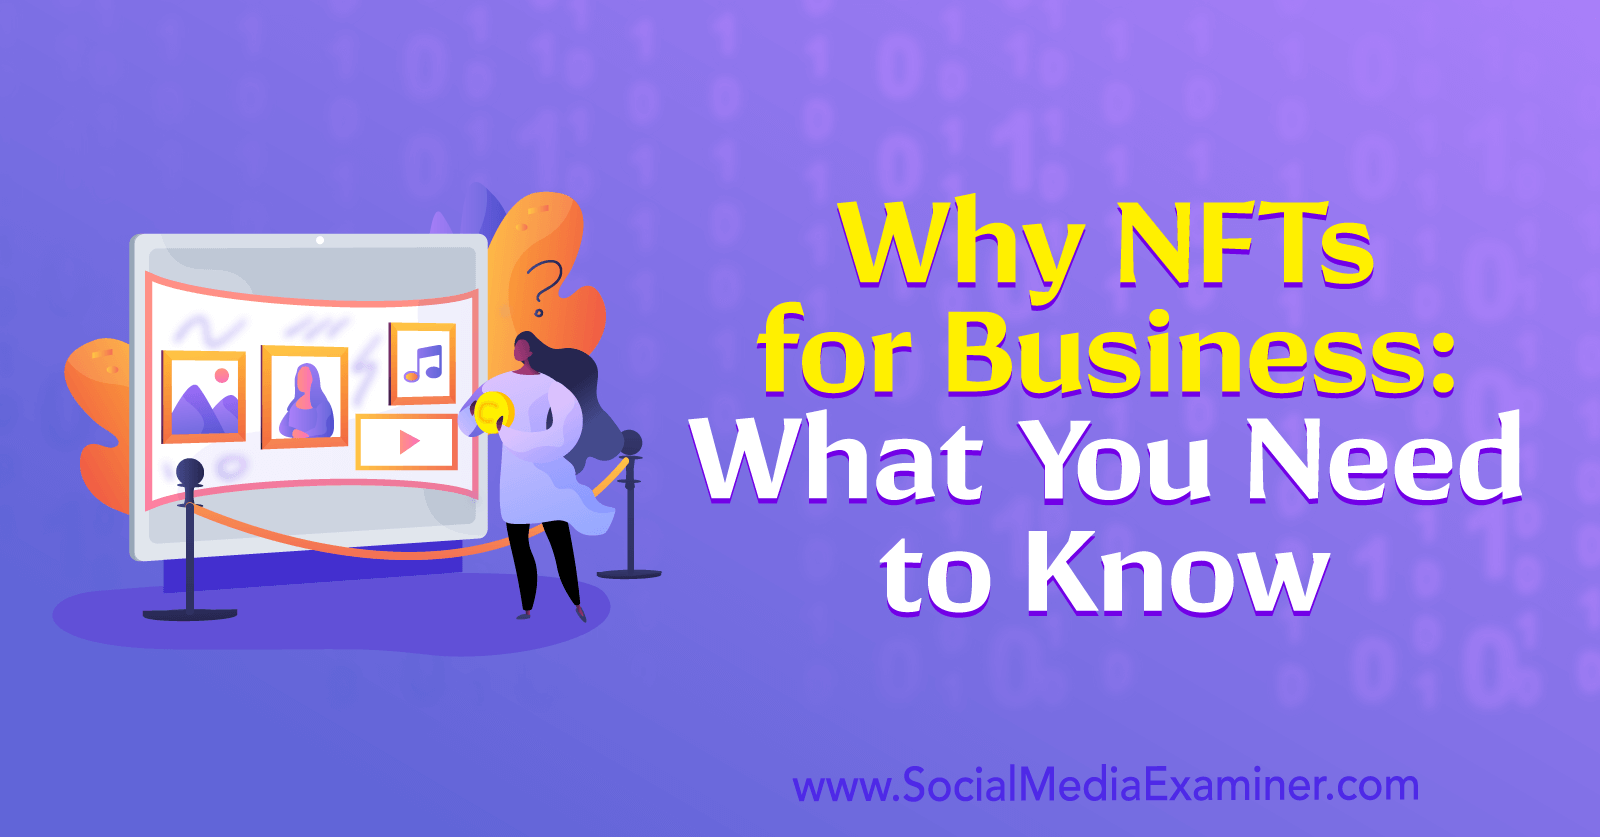 Why NFTs for Business: What You Need to Know featuring insights from Brian Fanzo on the Crypto Business Podcast.